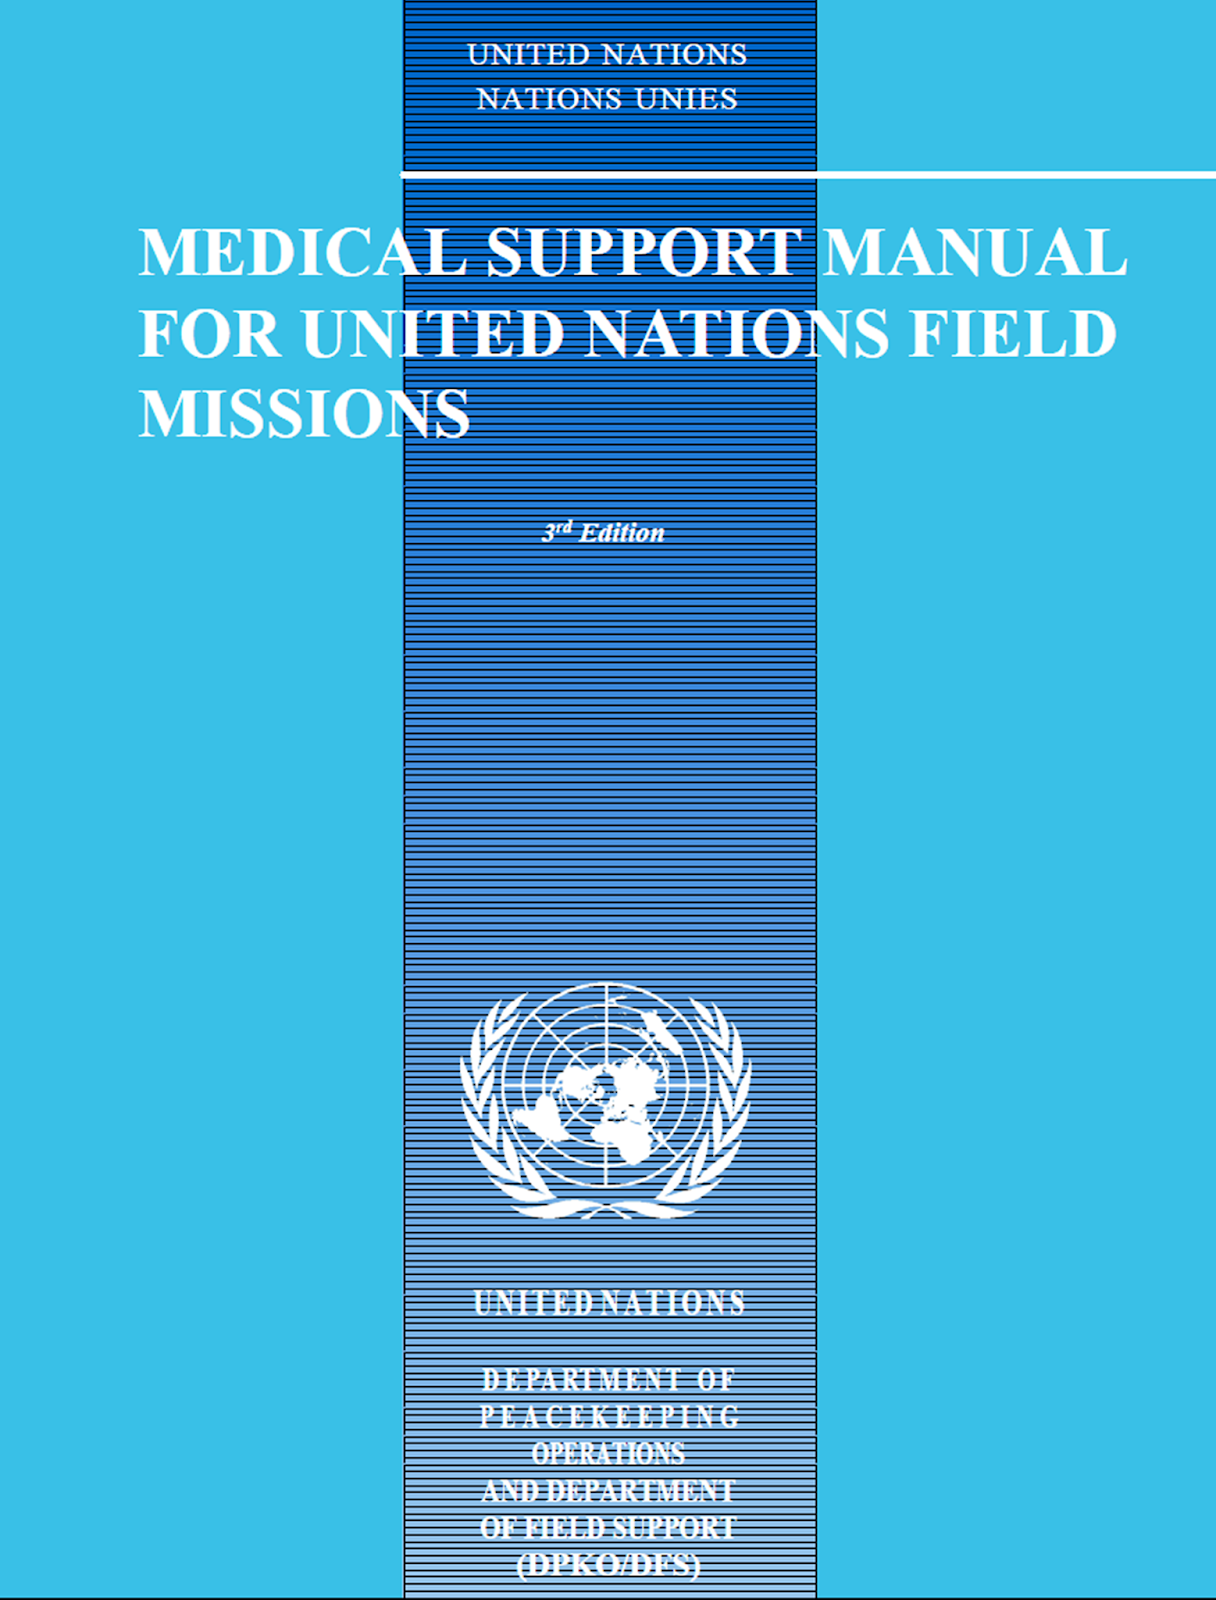 Support manual